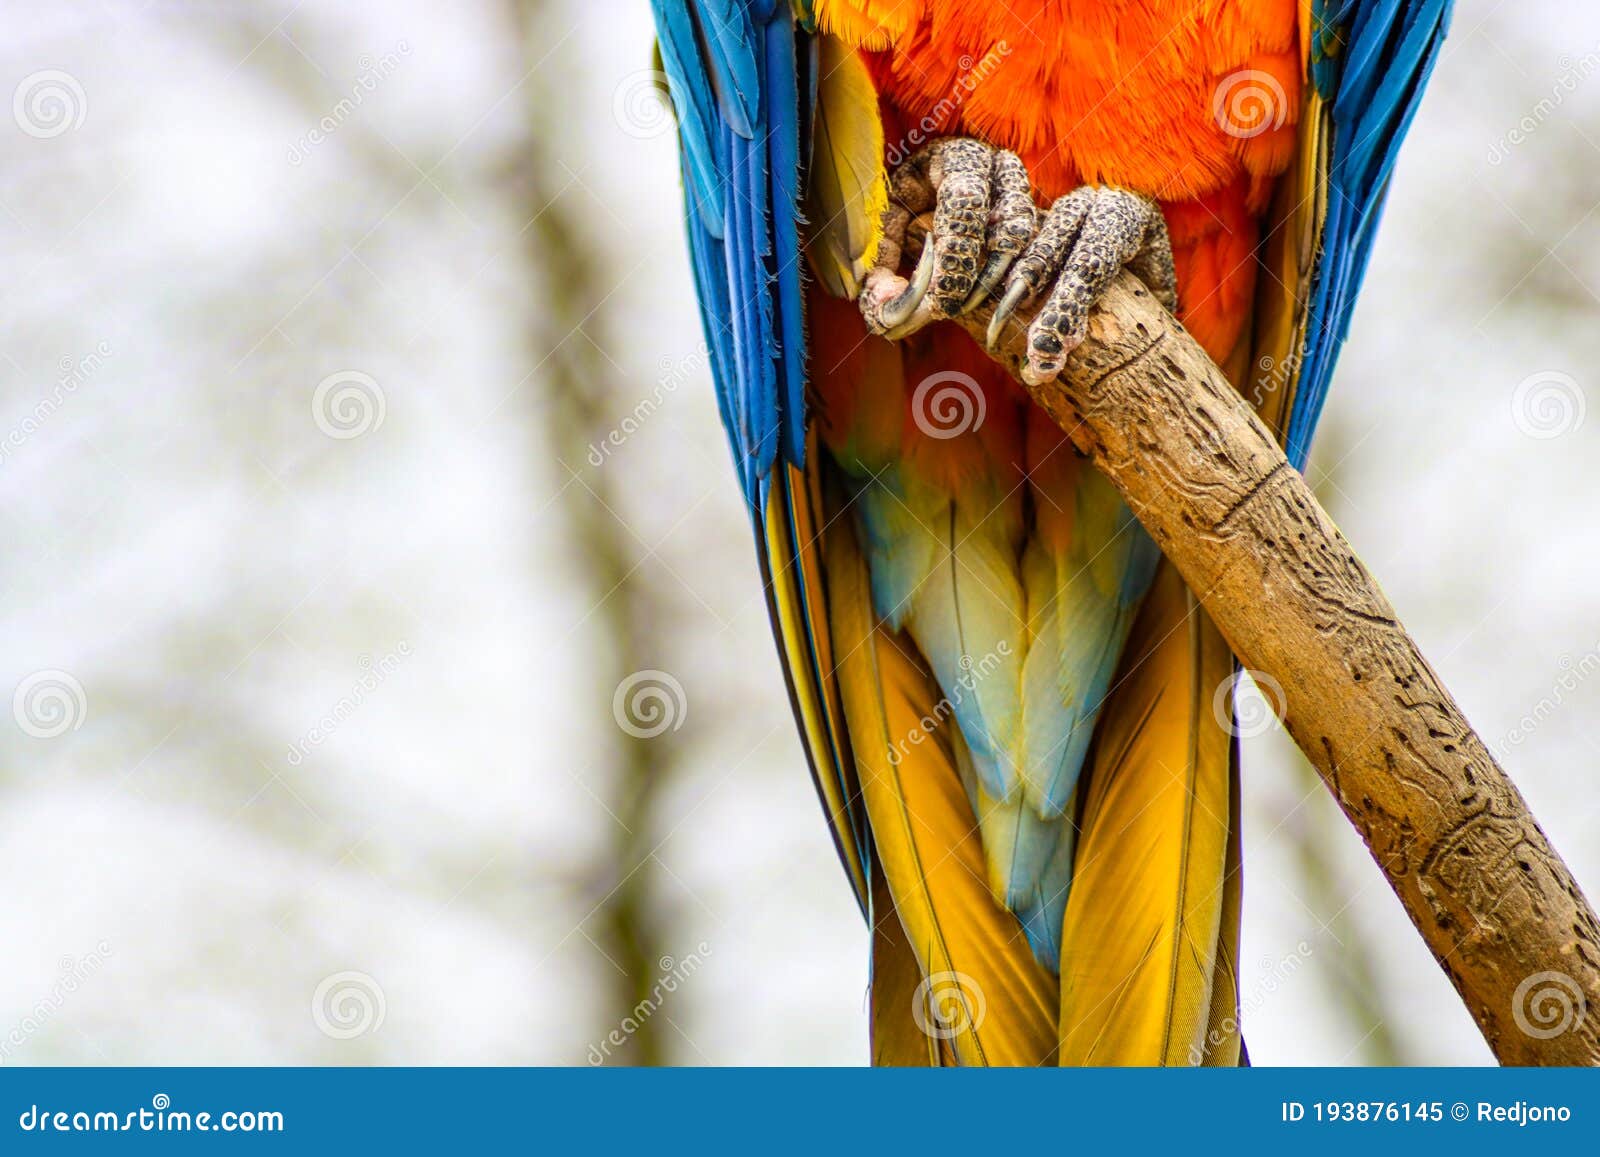 blue and gold macaw close up of feet on branch